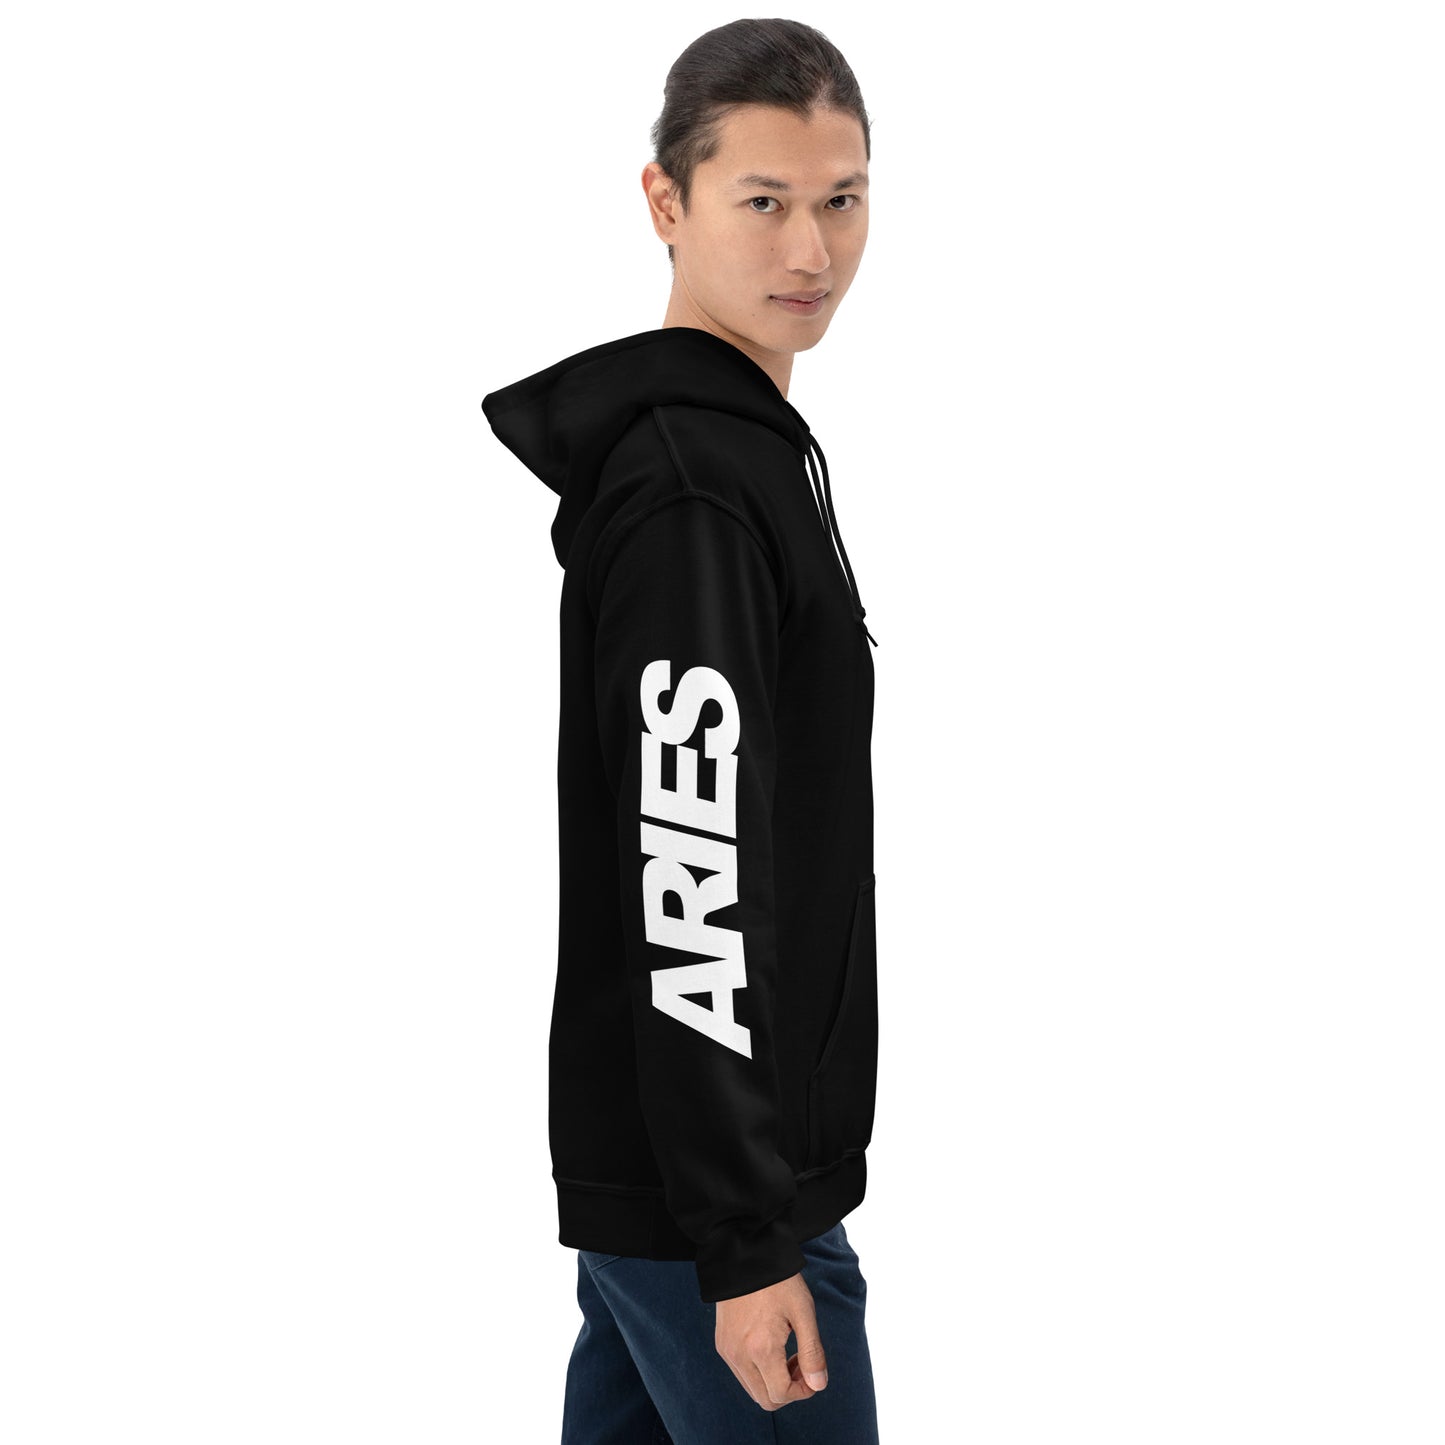 Aries & Cancer - Unisex Couple Hoodie